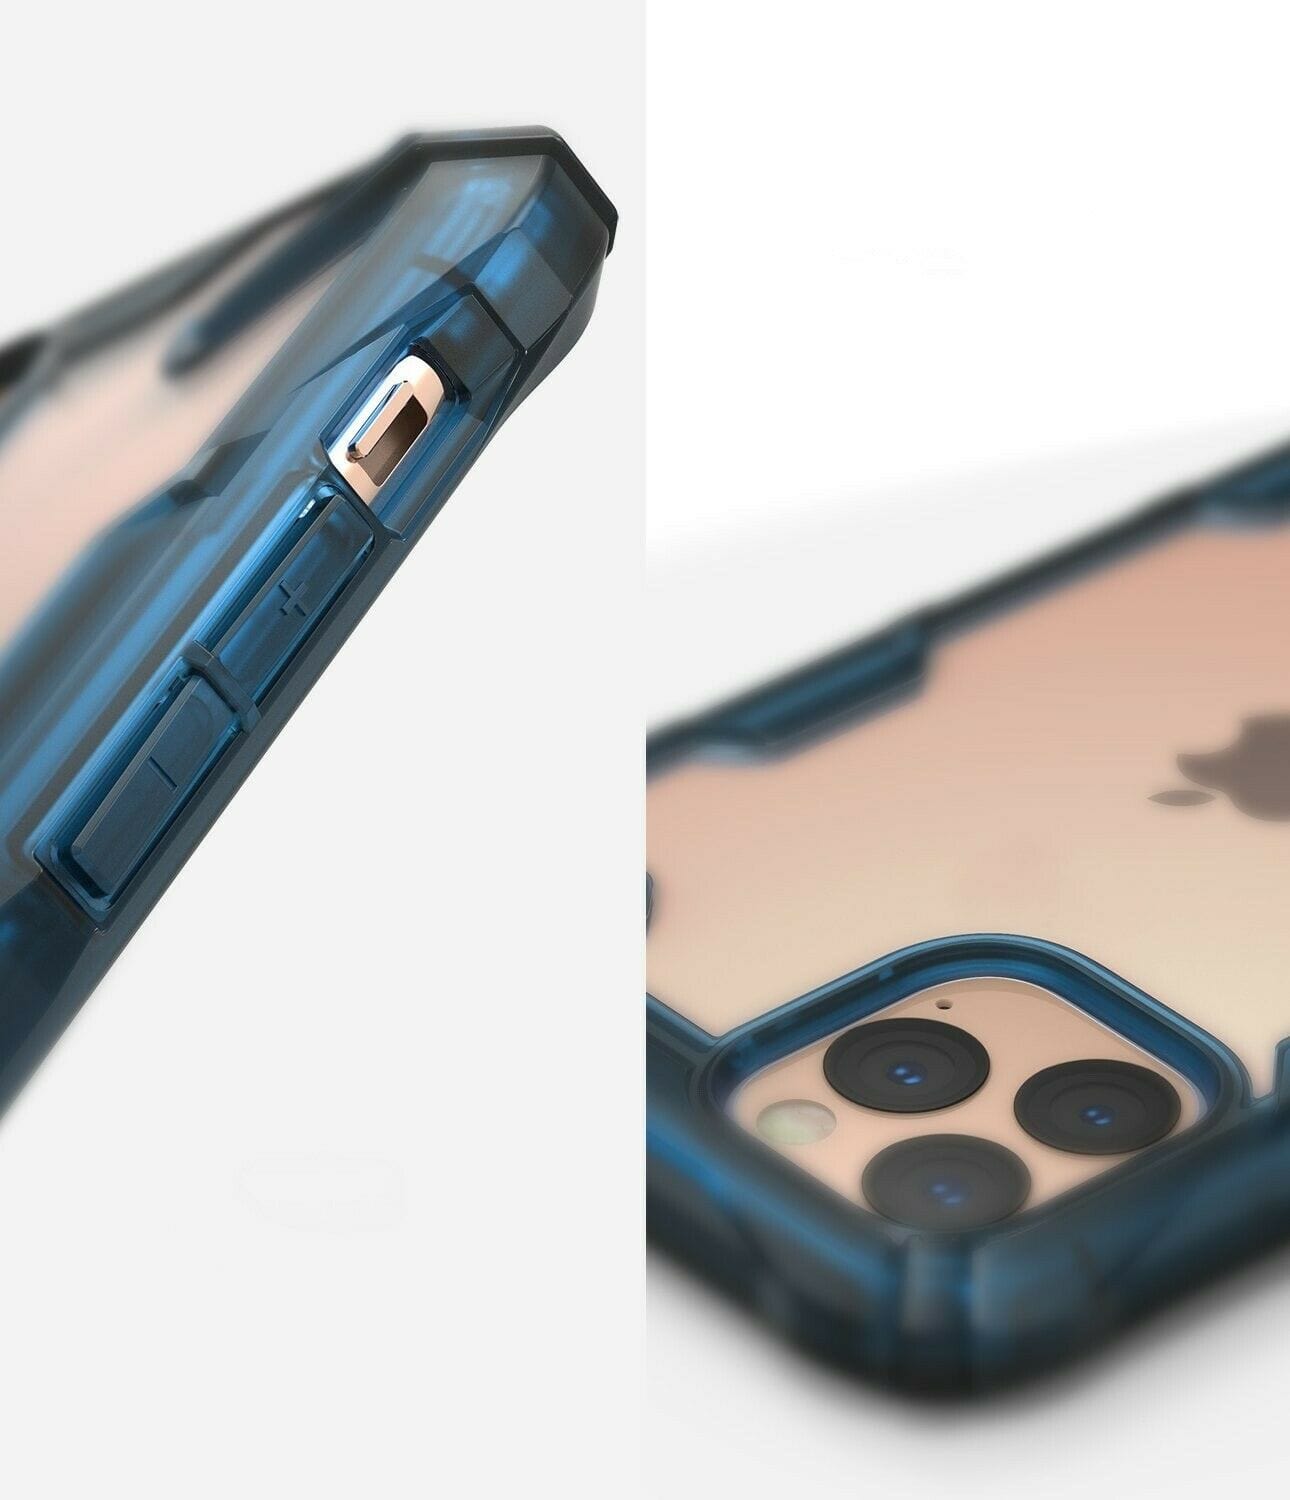 Precise Cutout and rugged designed case for iPhone 11 Pro max